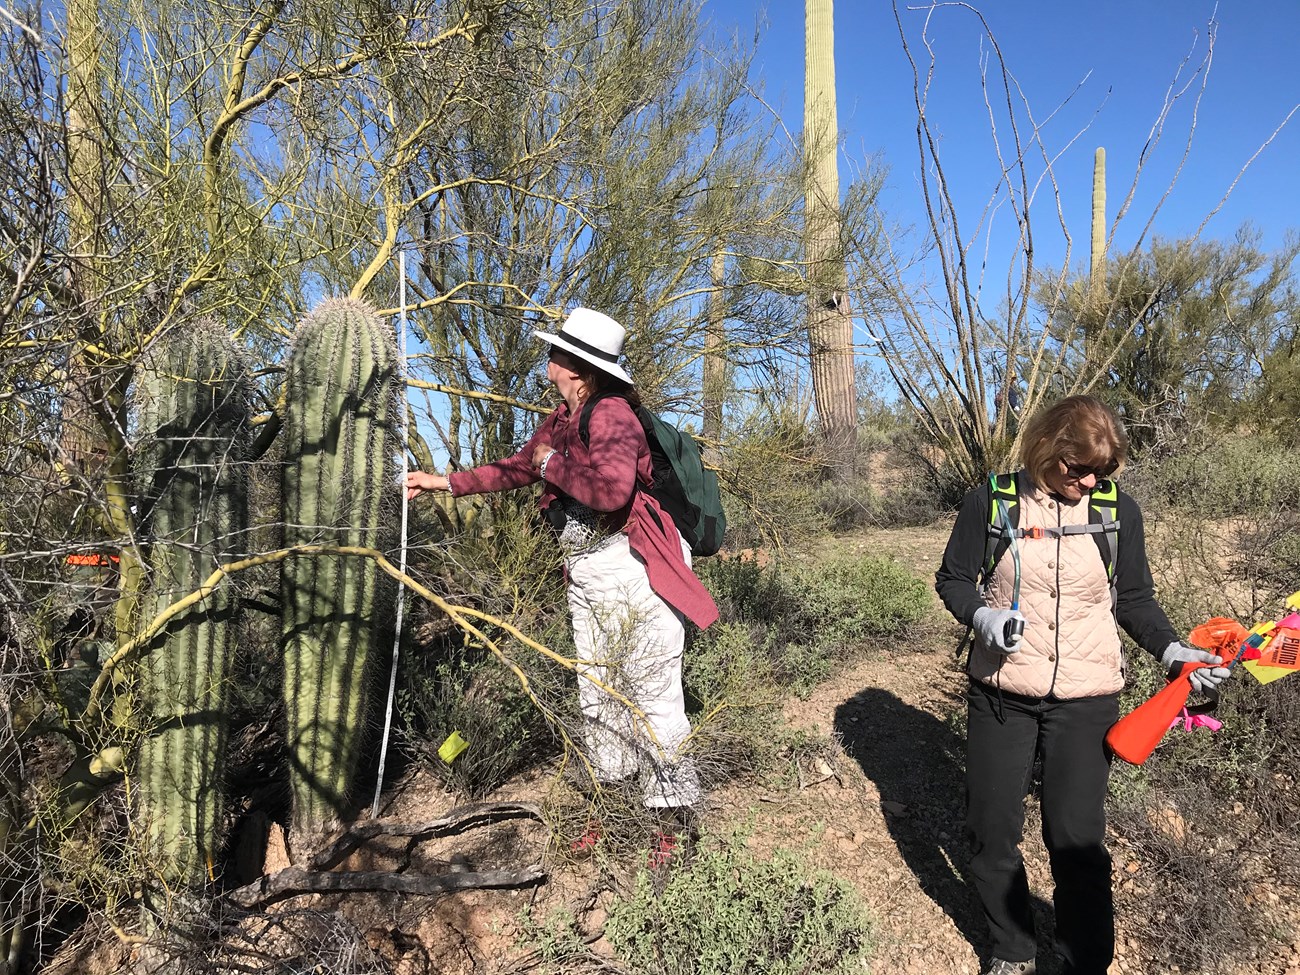 A woman holding a meter stick next to a saguaro to find its height.